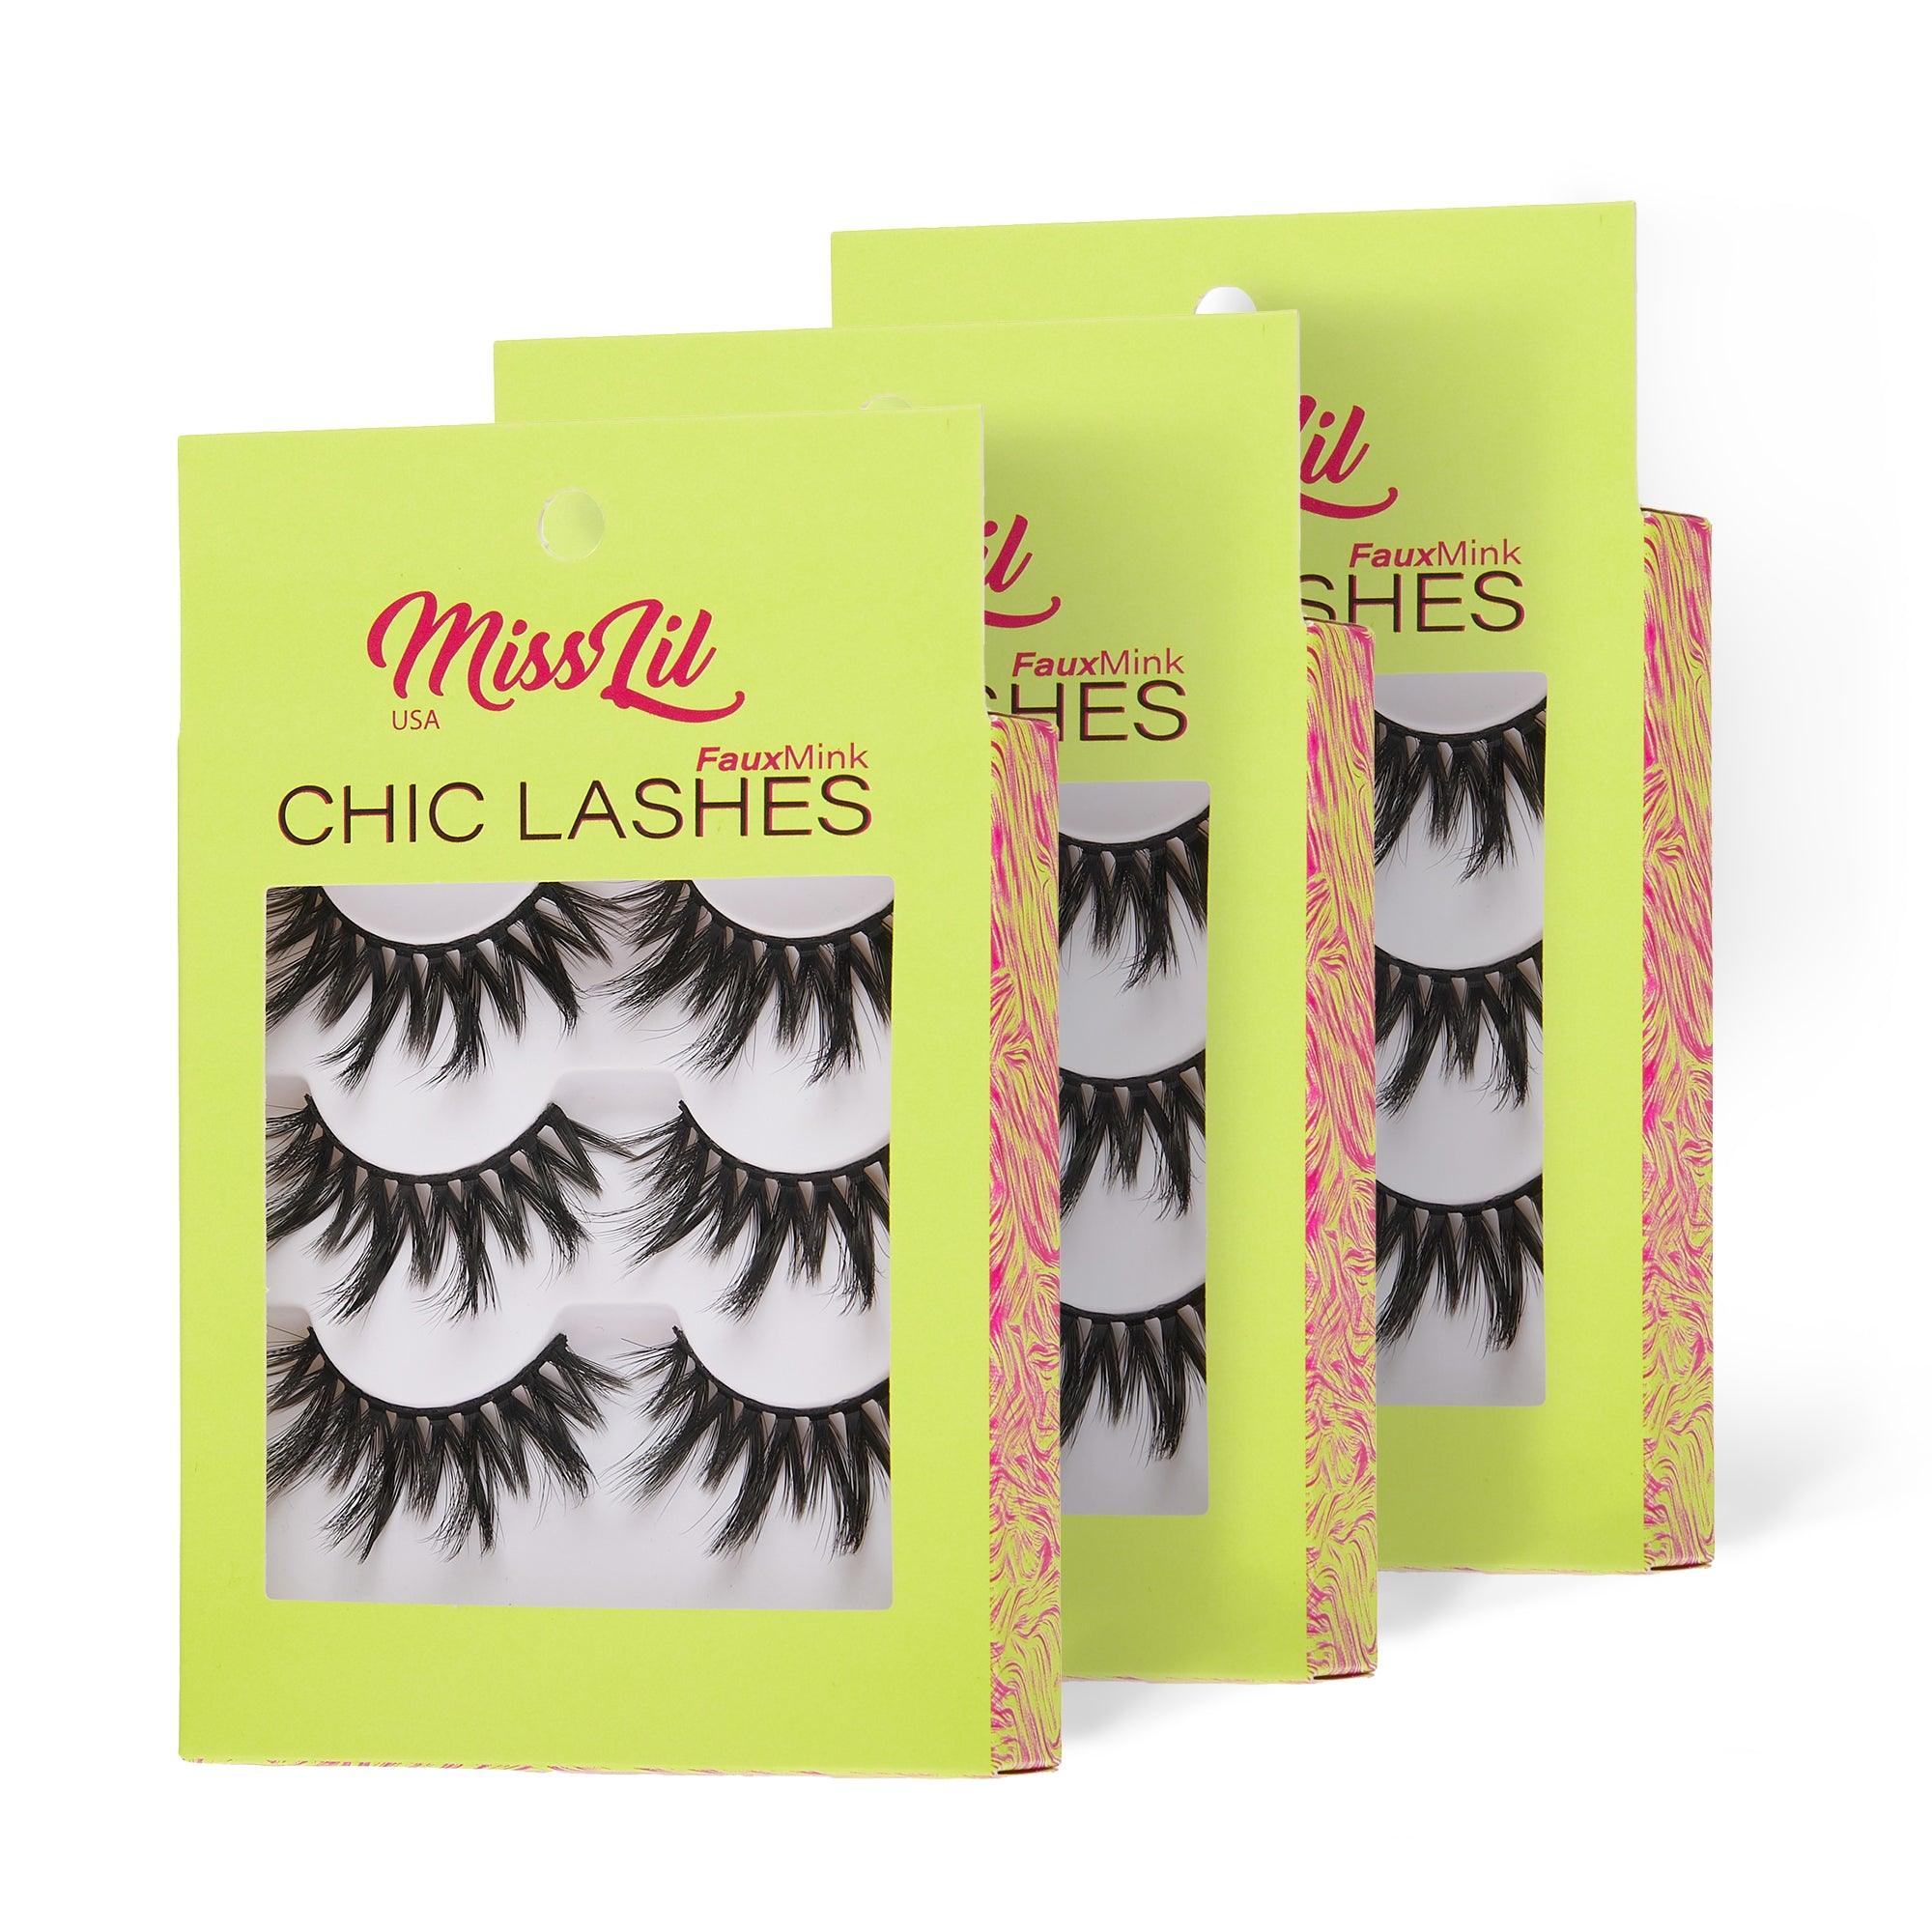 3-Pair Faux Mink Eyelashes - Chic Lashes Collection #20 - Pack of 3 - Miss Lil USA